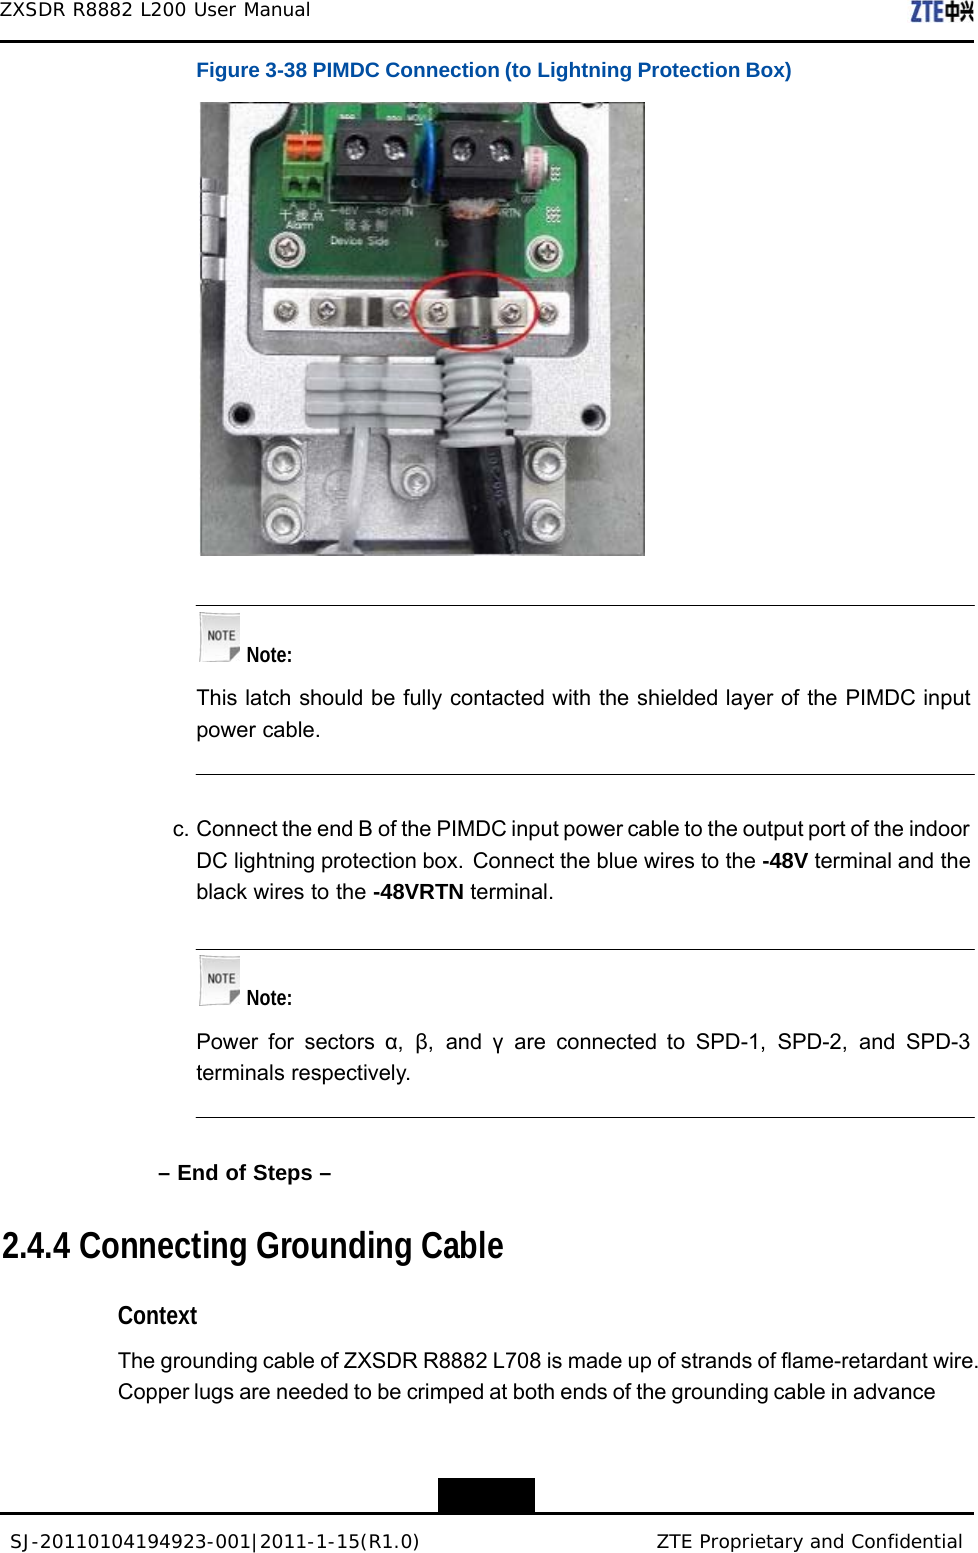 SJ-20110104194923-001|2011-1-15(R1.0) ZTE Proprietary and Confidential ZXSDR R8882 L200 User Manual    Figure 3-38 PIMDC Connection (to Lightning Protection Box)       Note:  This latch should be fully contacted with the shielded layer of the PIMDC input power cable.    c. Connect the end B of the PIMDC input power cable to the output port of the indoor DC lightning protection box. Connect the blue wires to the -48V terminal and the black wires to the -48VRTN terminal.     Note:  Power for sectors α,  β, and γ are connected to SPD-1, SPD-2, and SPD-3 terminals respectively.    – End of Steps –   2.4.4 Connecting Grounding Cable   Context  The grounding cable of ZXSDR R8882 L708 is made up of strands of flame-retardant wire. Copper lugs are needed to be crimped at both ends of the grounding cable in advance   3-28 